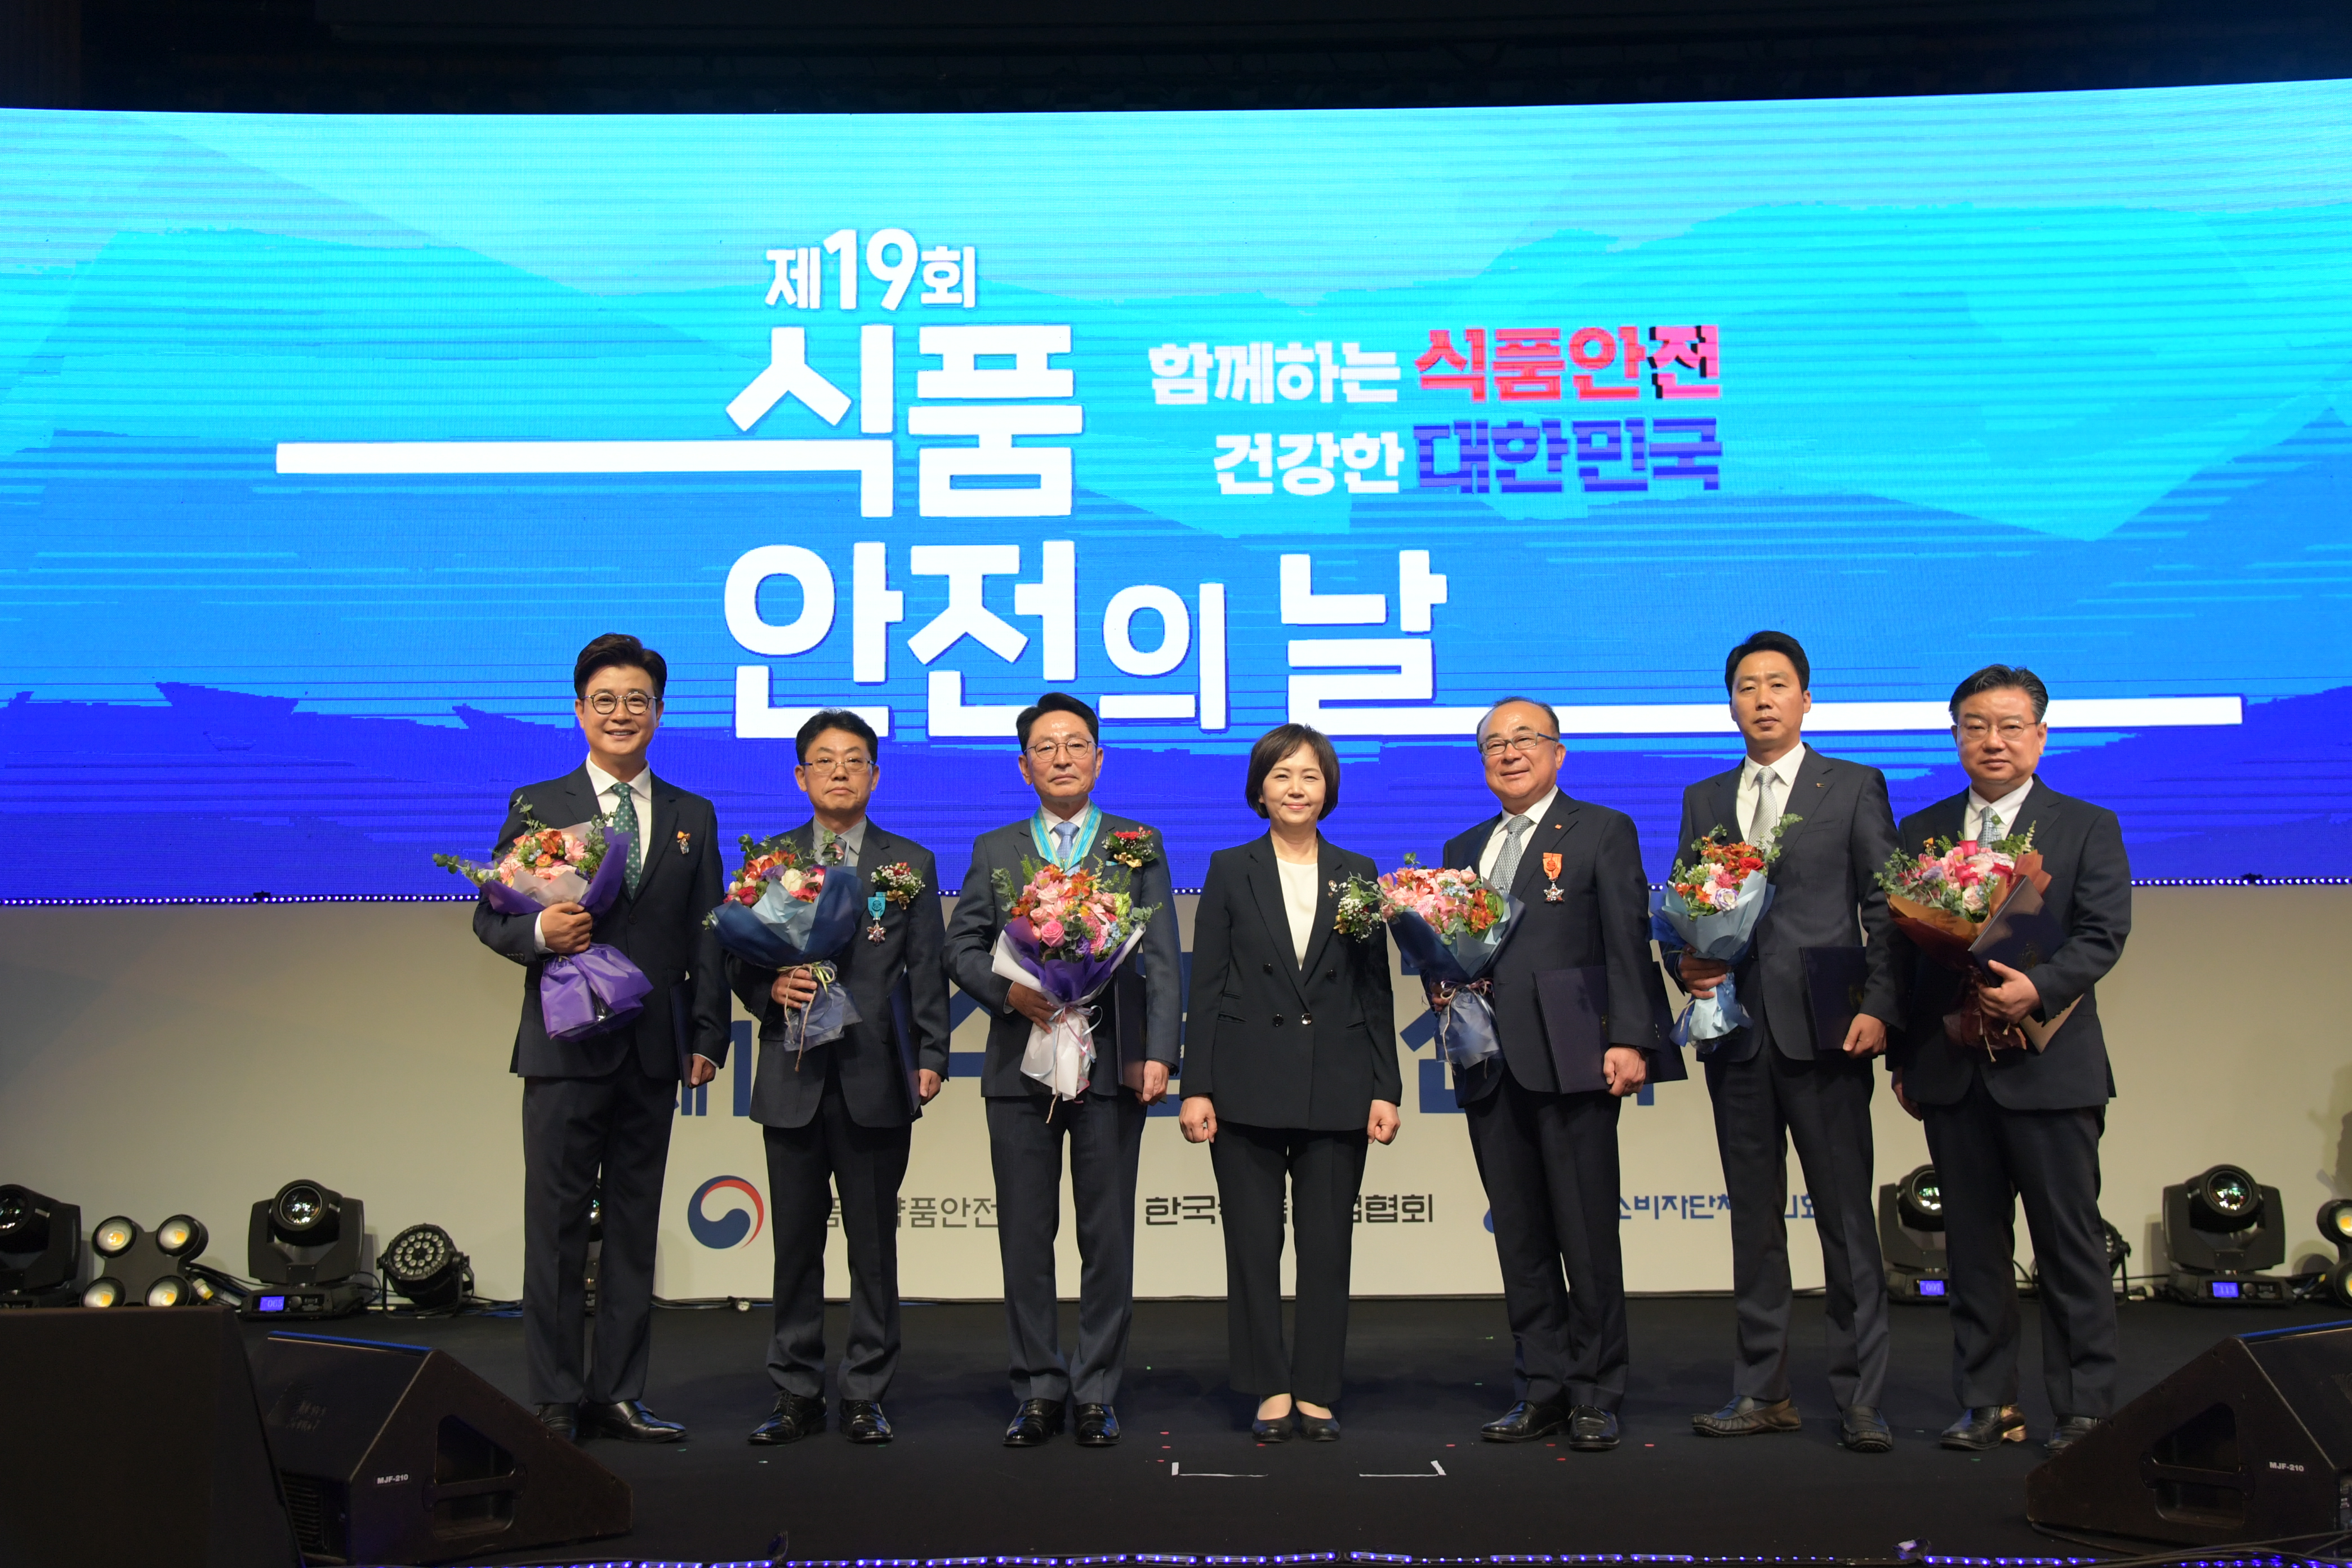 Photo News2 - [Jun. 15, 2020] Commemoration of the 19th Food Safety Day